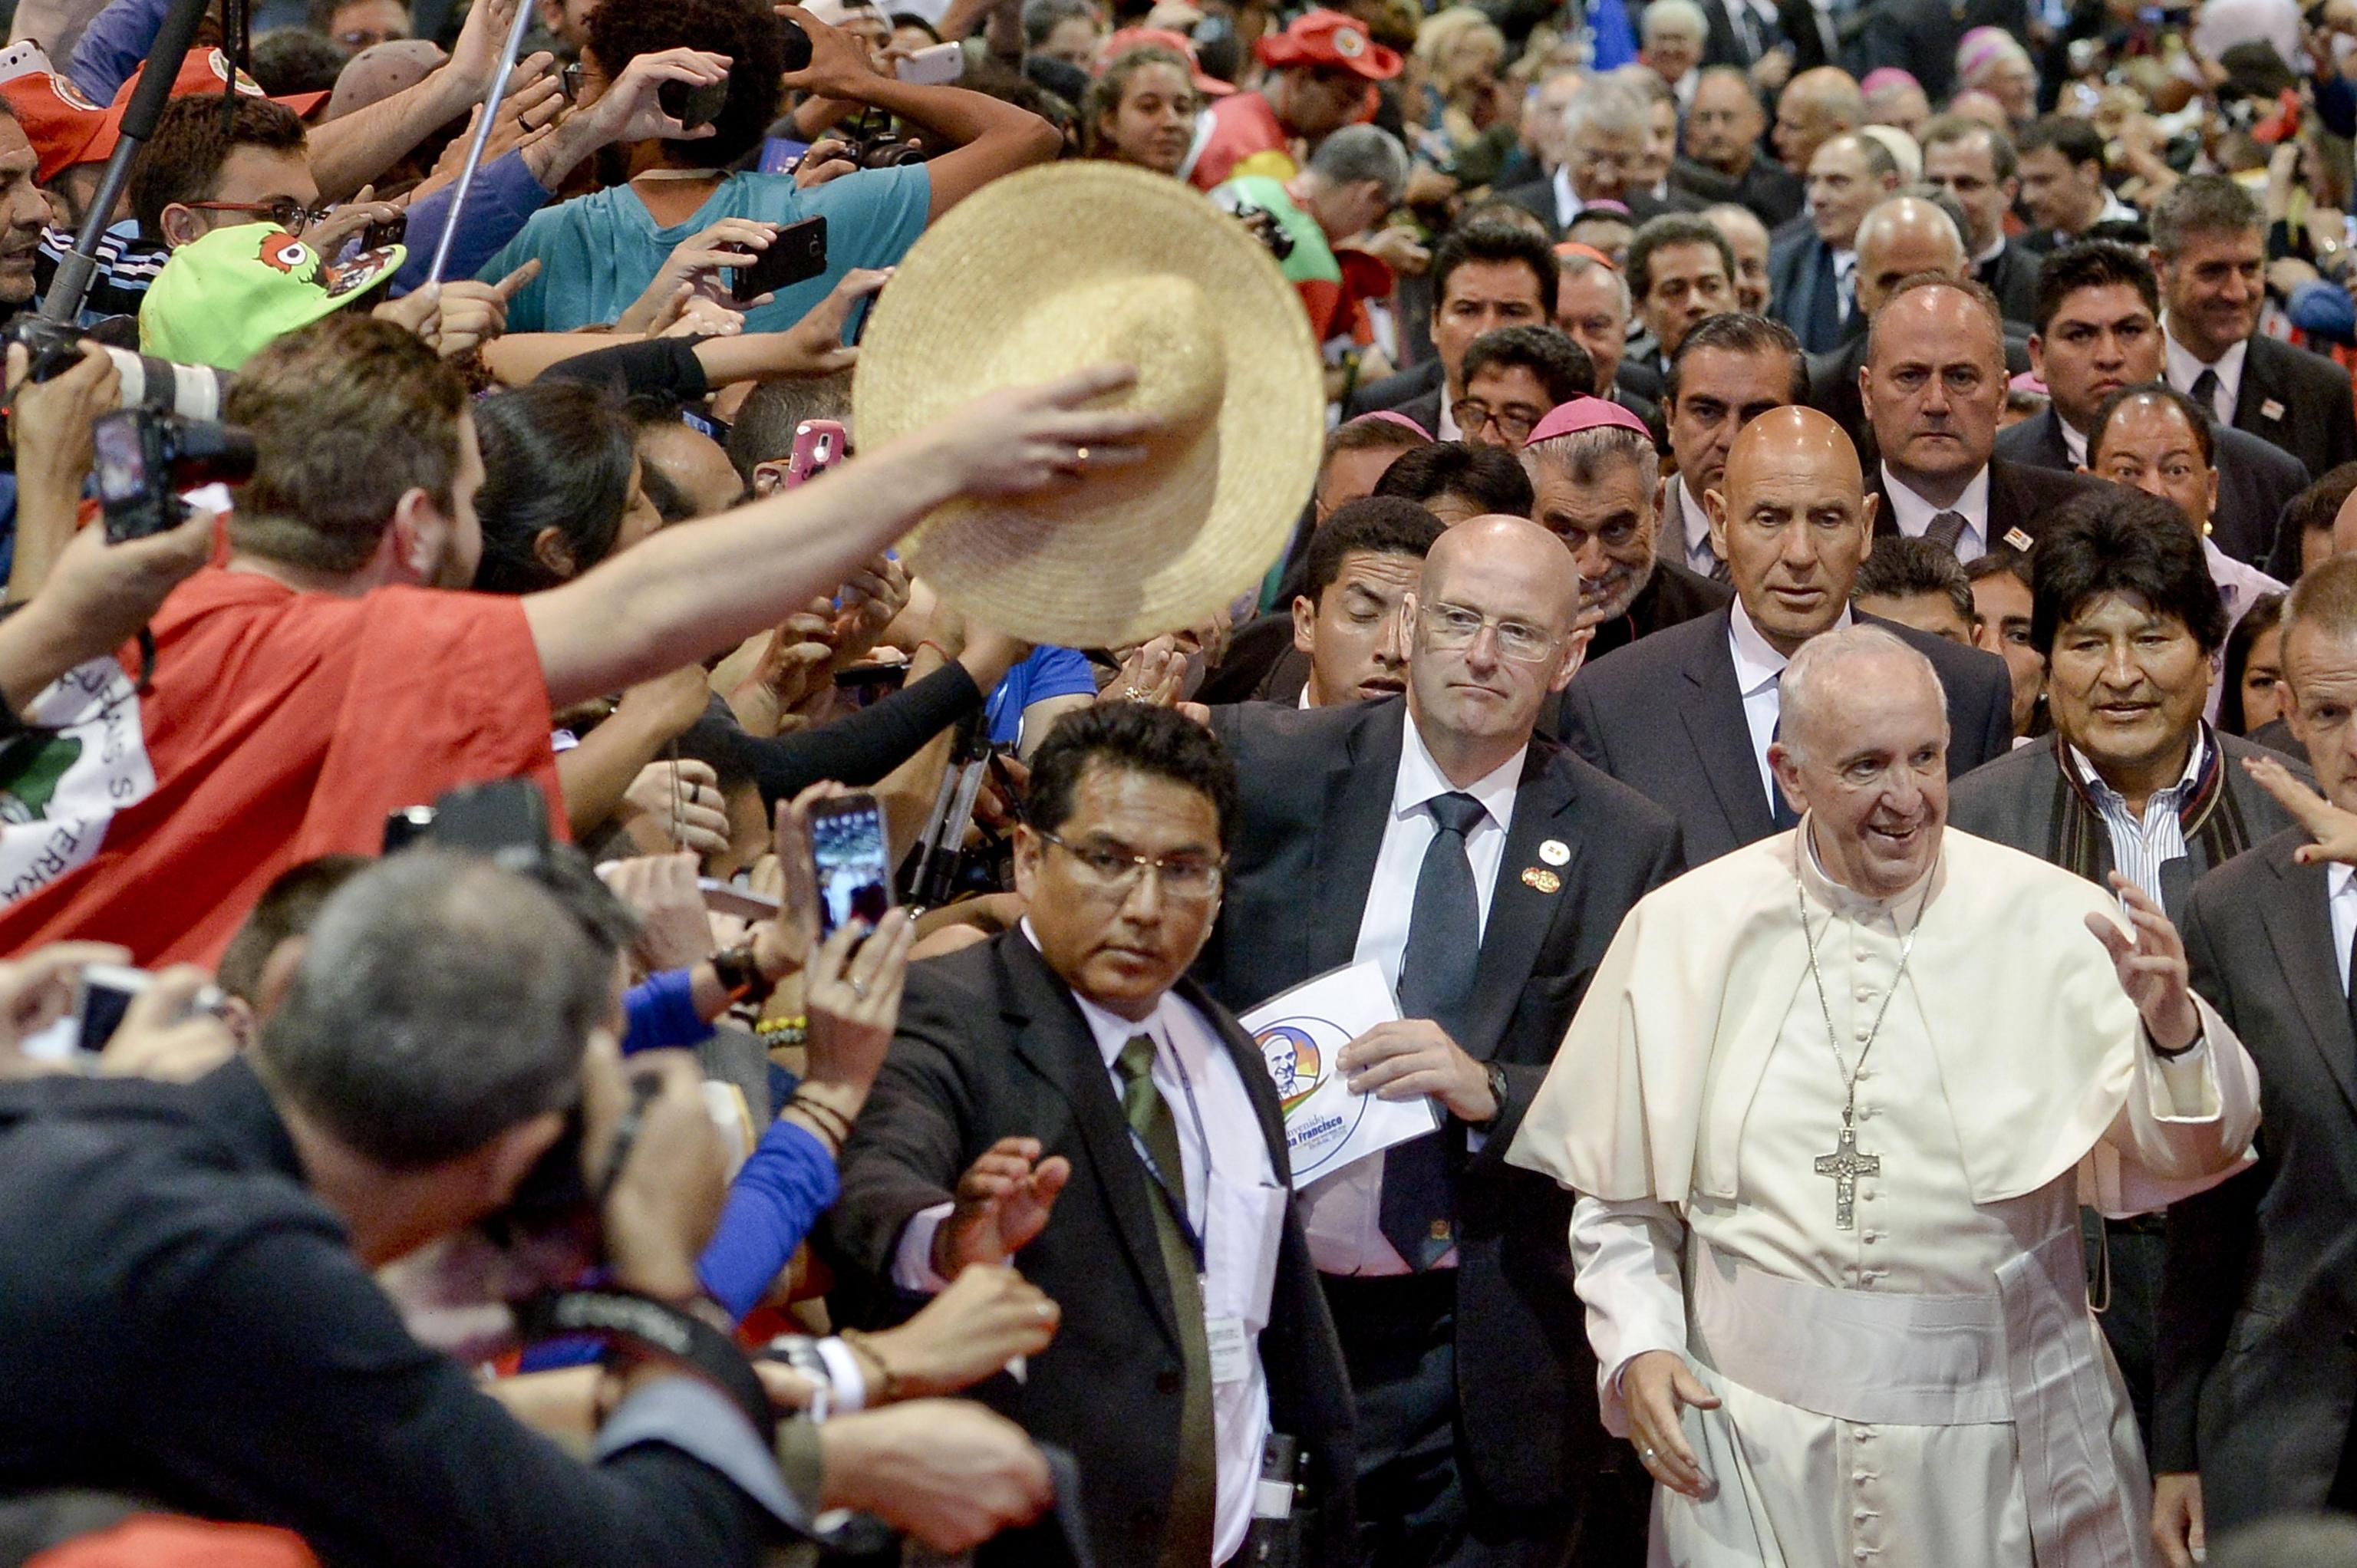 Pope Francis arrives at the second World Meeting of Popular Movements in Santa Cruz